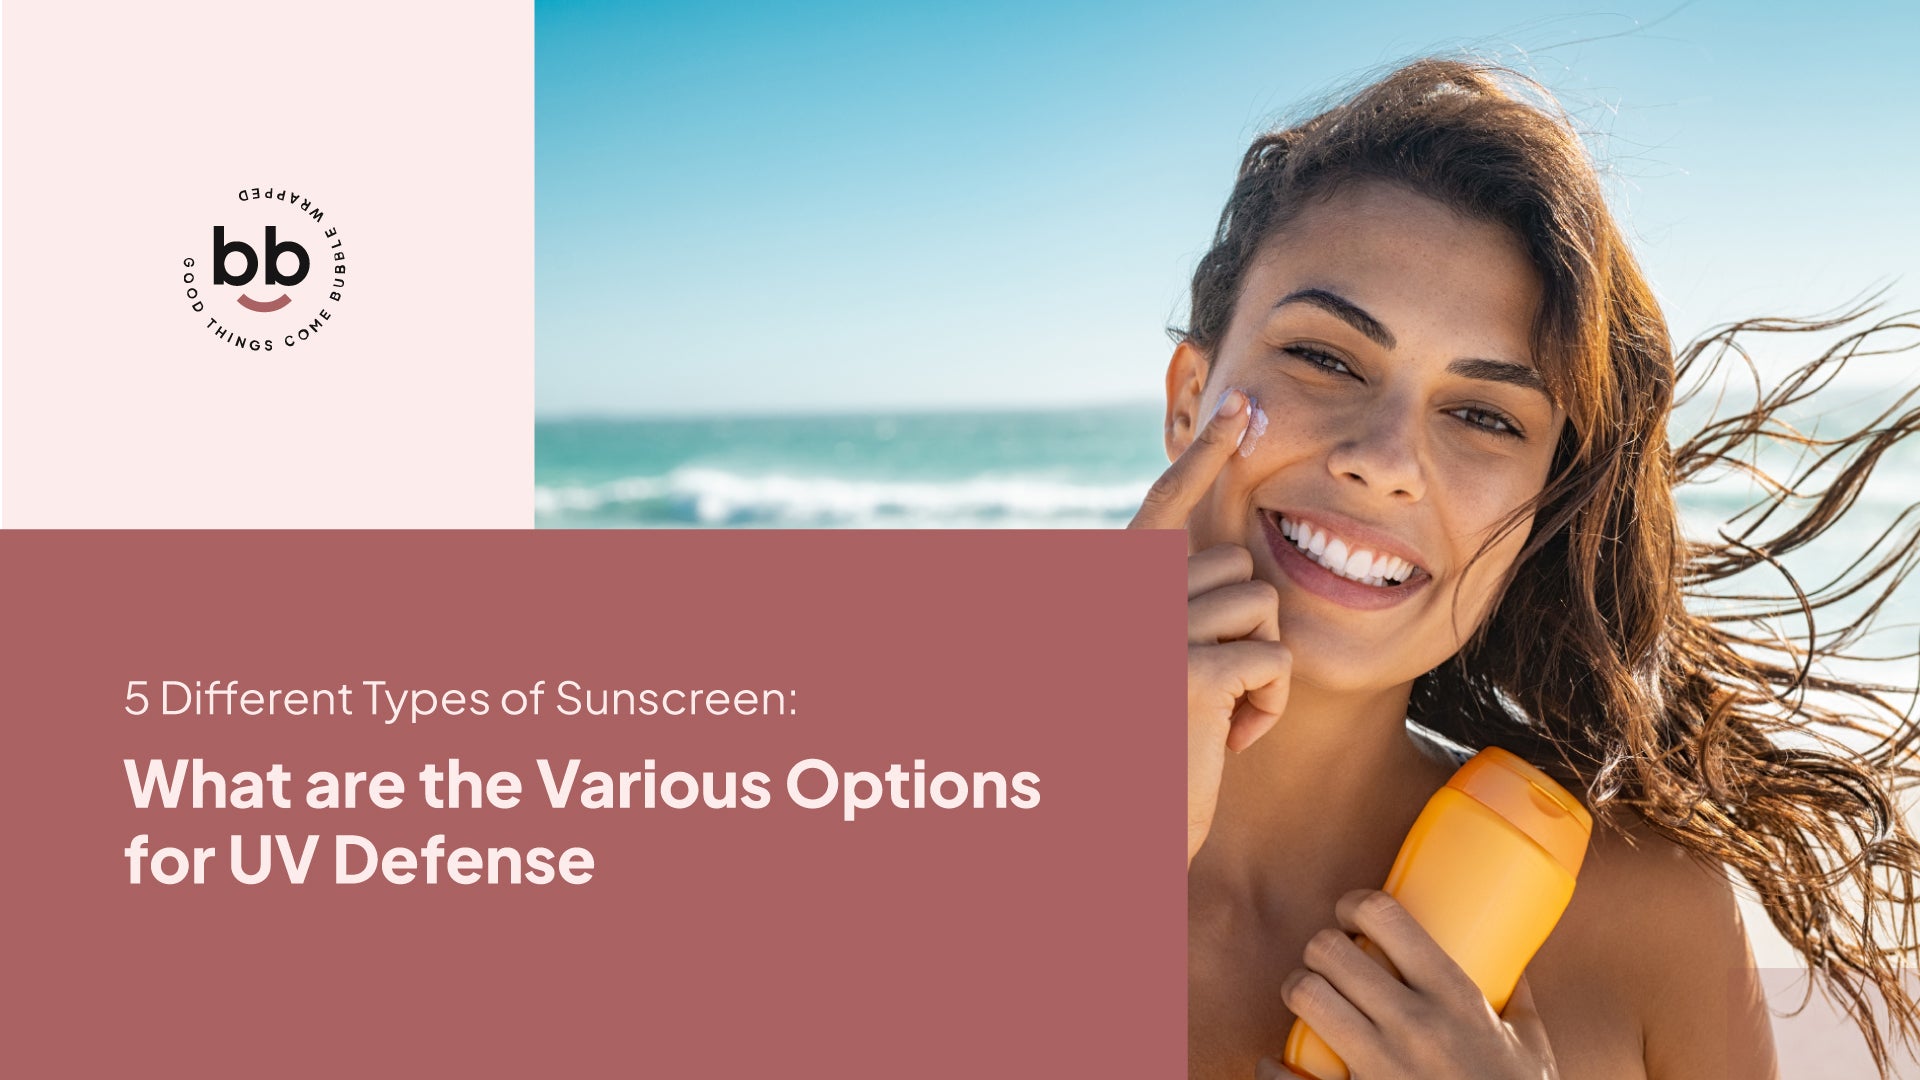 5 Different Types of Sunscreen: What are the Various Options for UV Defense